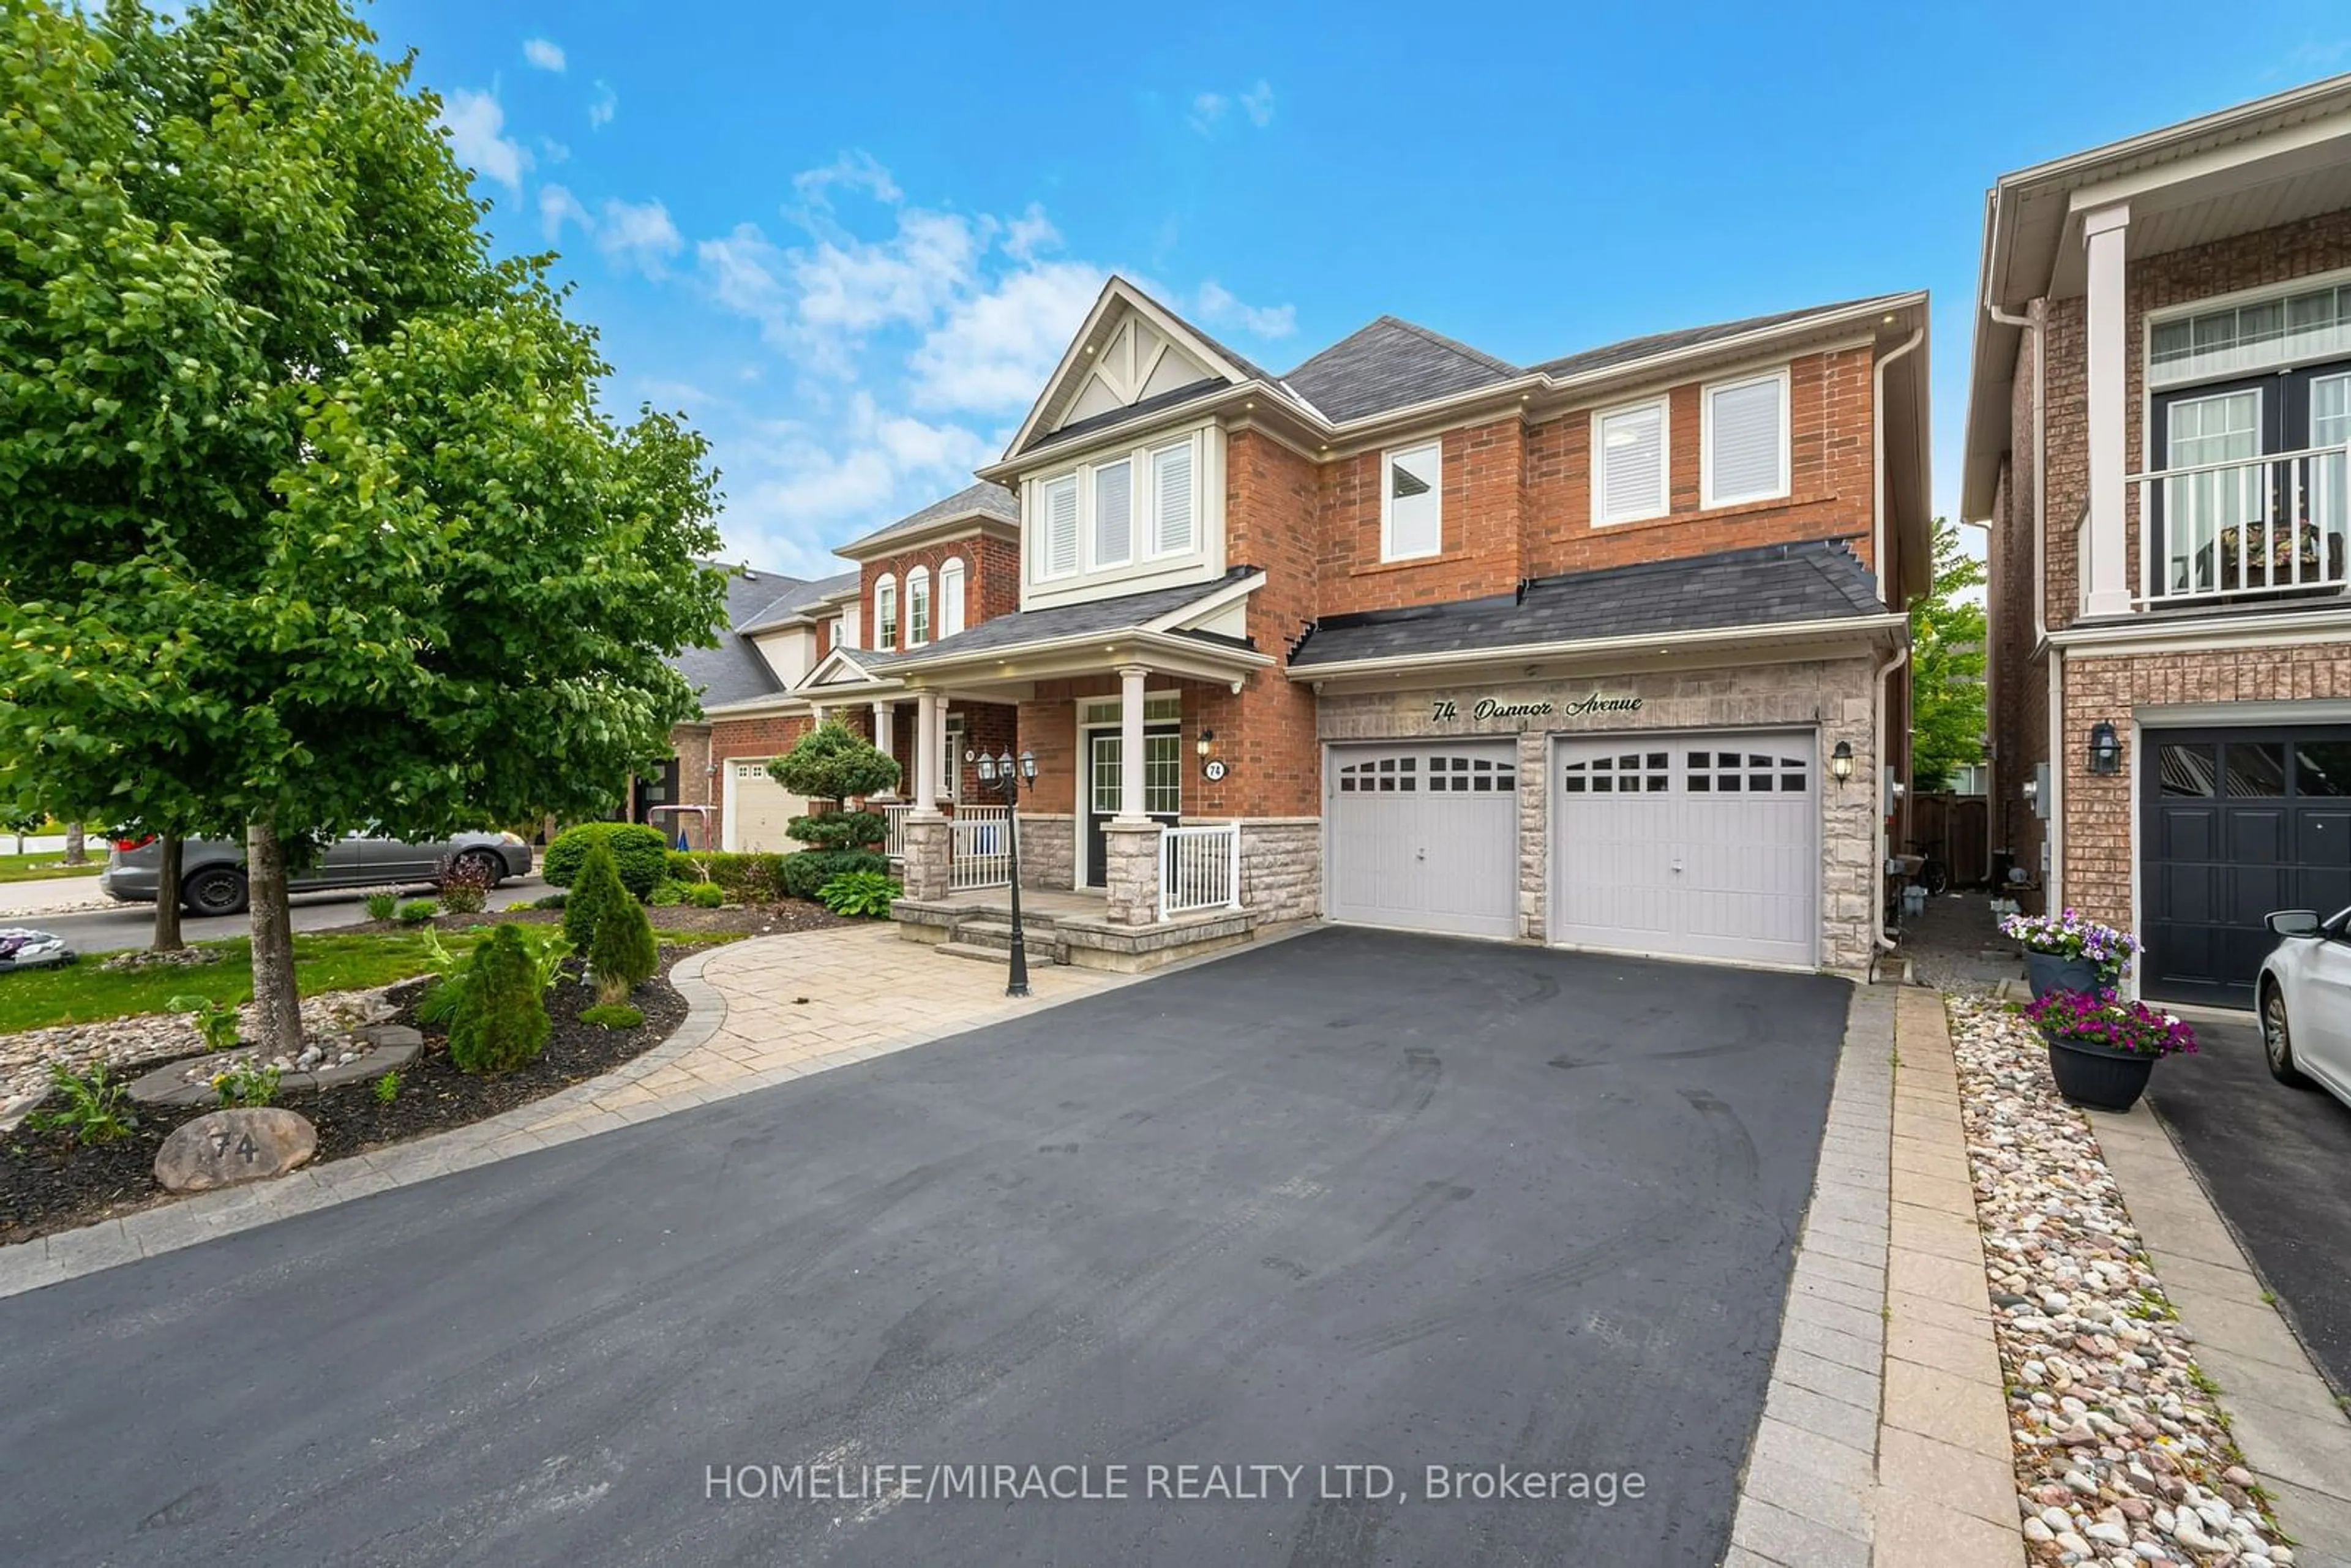 Frontside or backside of a home for 74 Dannor Ave, Whitchurch-Stouffville Ontario L4A 0V6